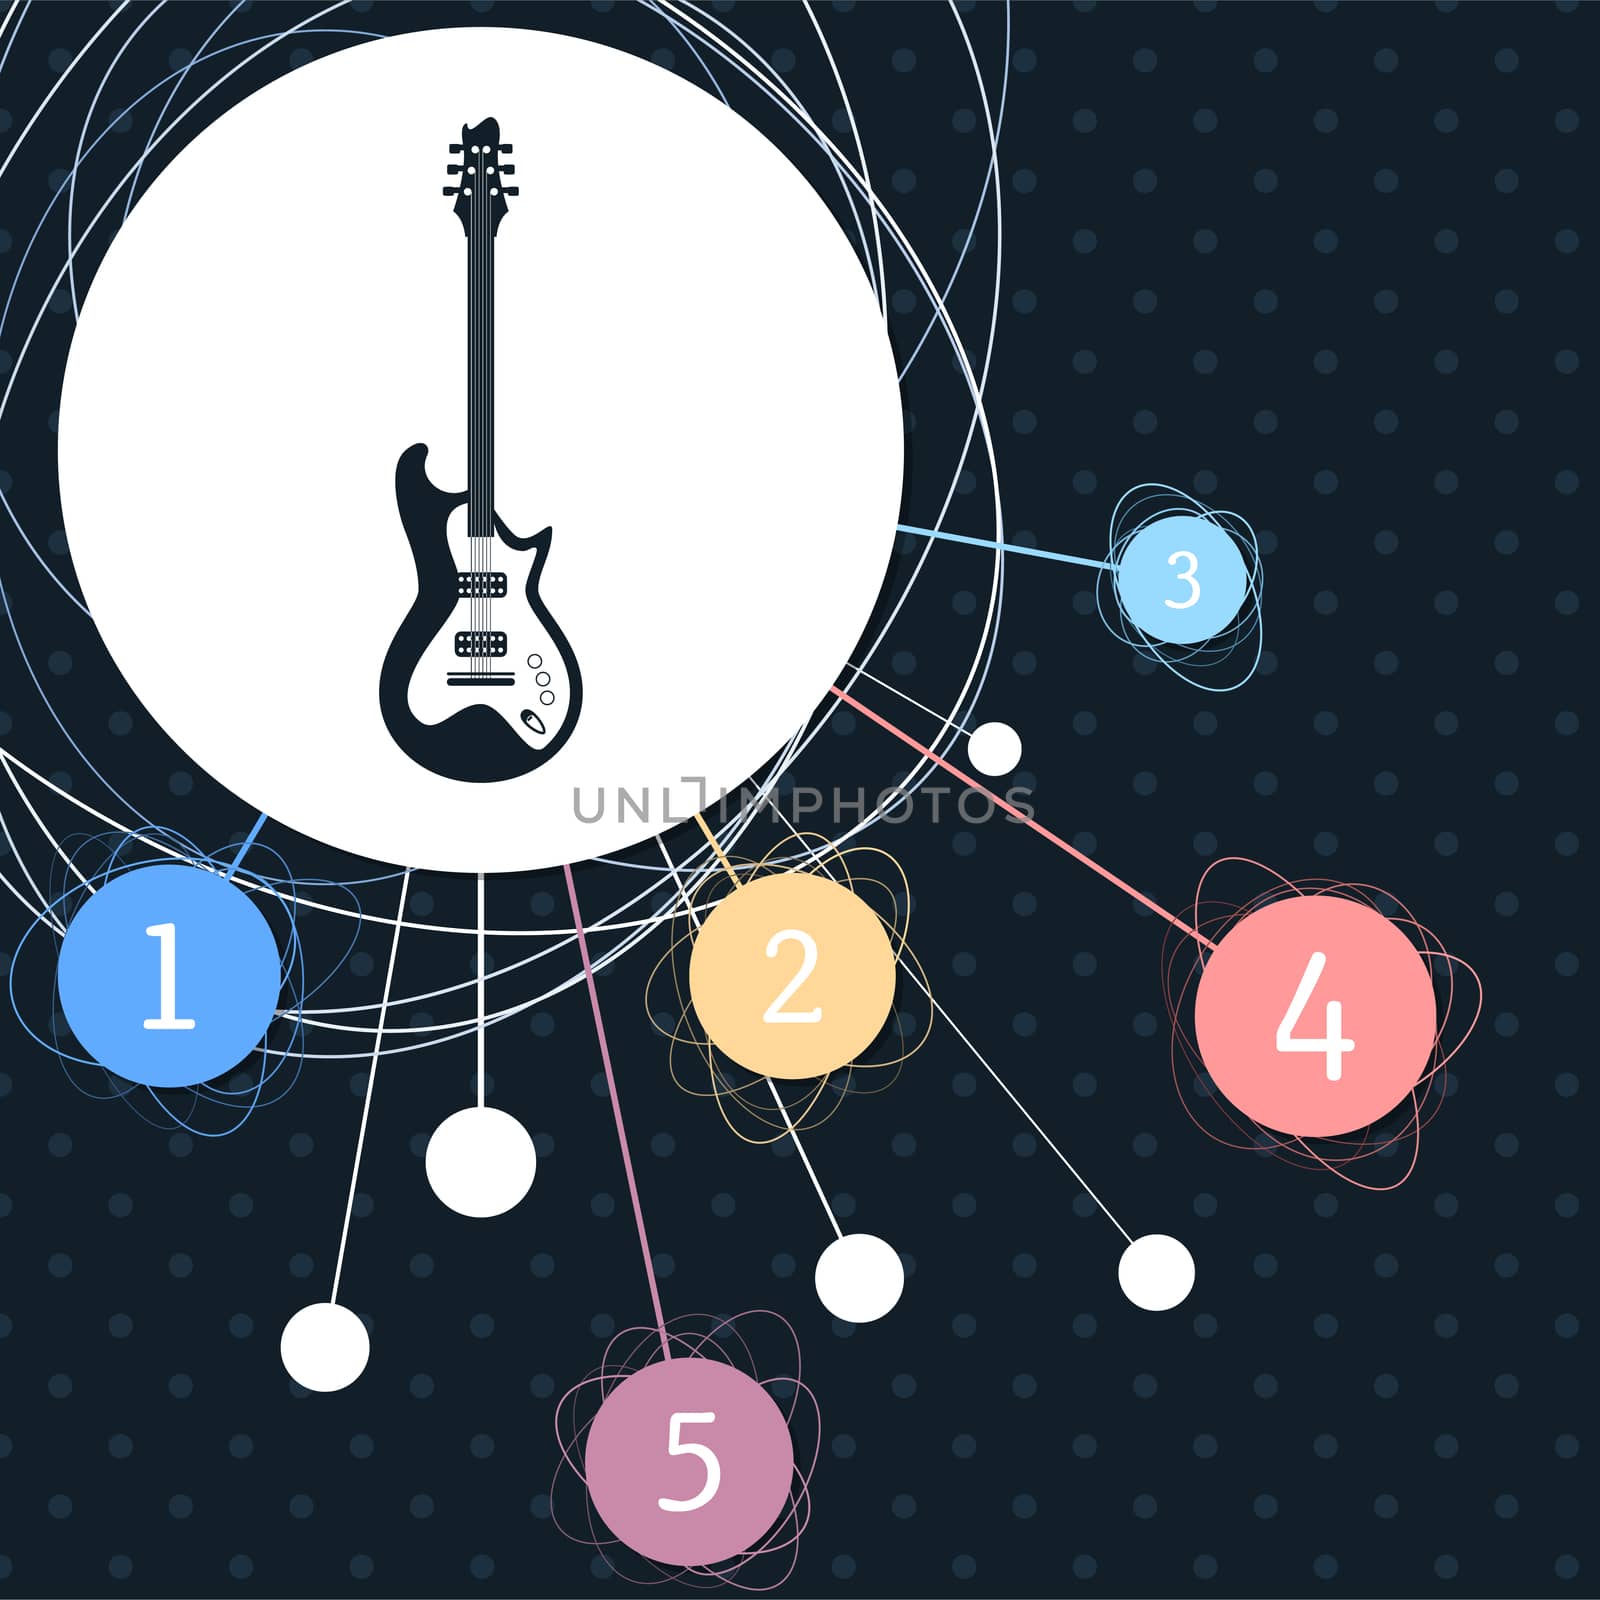 Electric guitar icon. with the background to the point and with infographic style. illustration